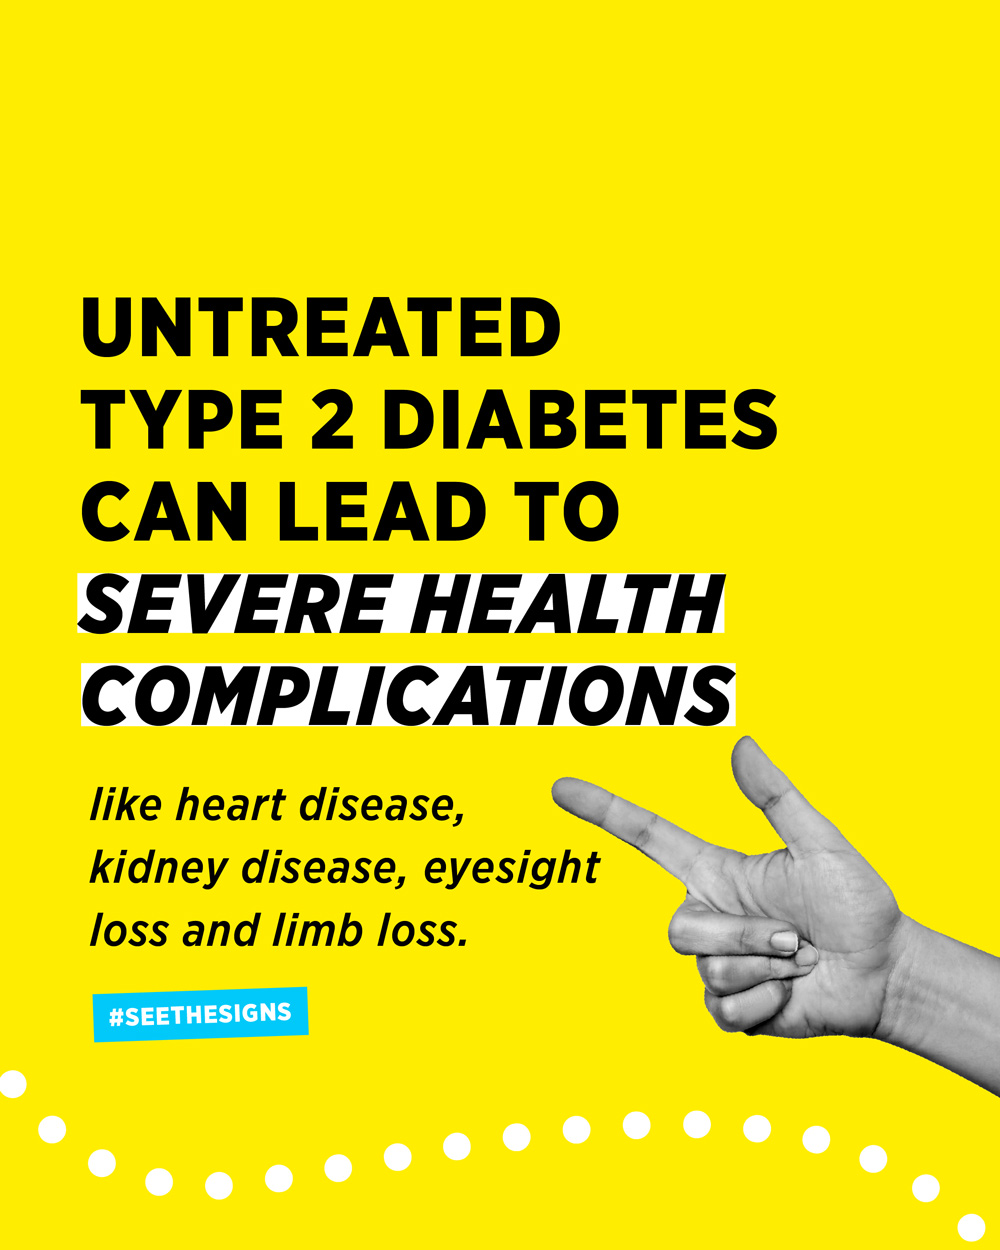 Untreated type 2 diabetes can lead to severe health complications